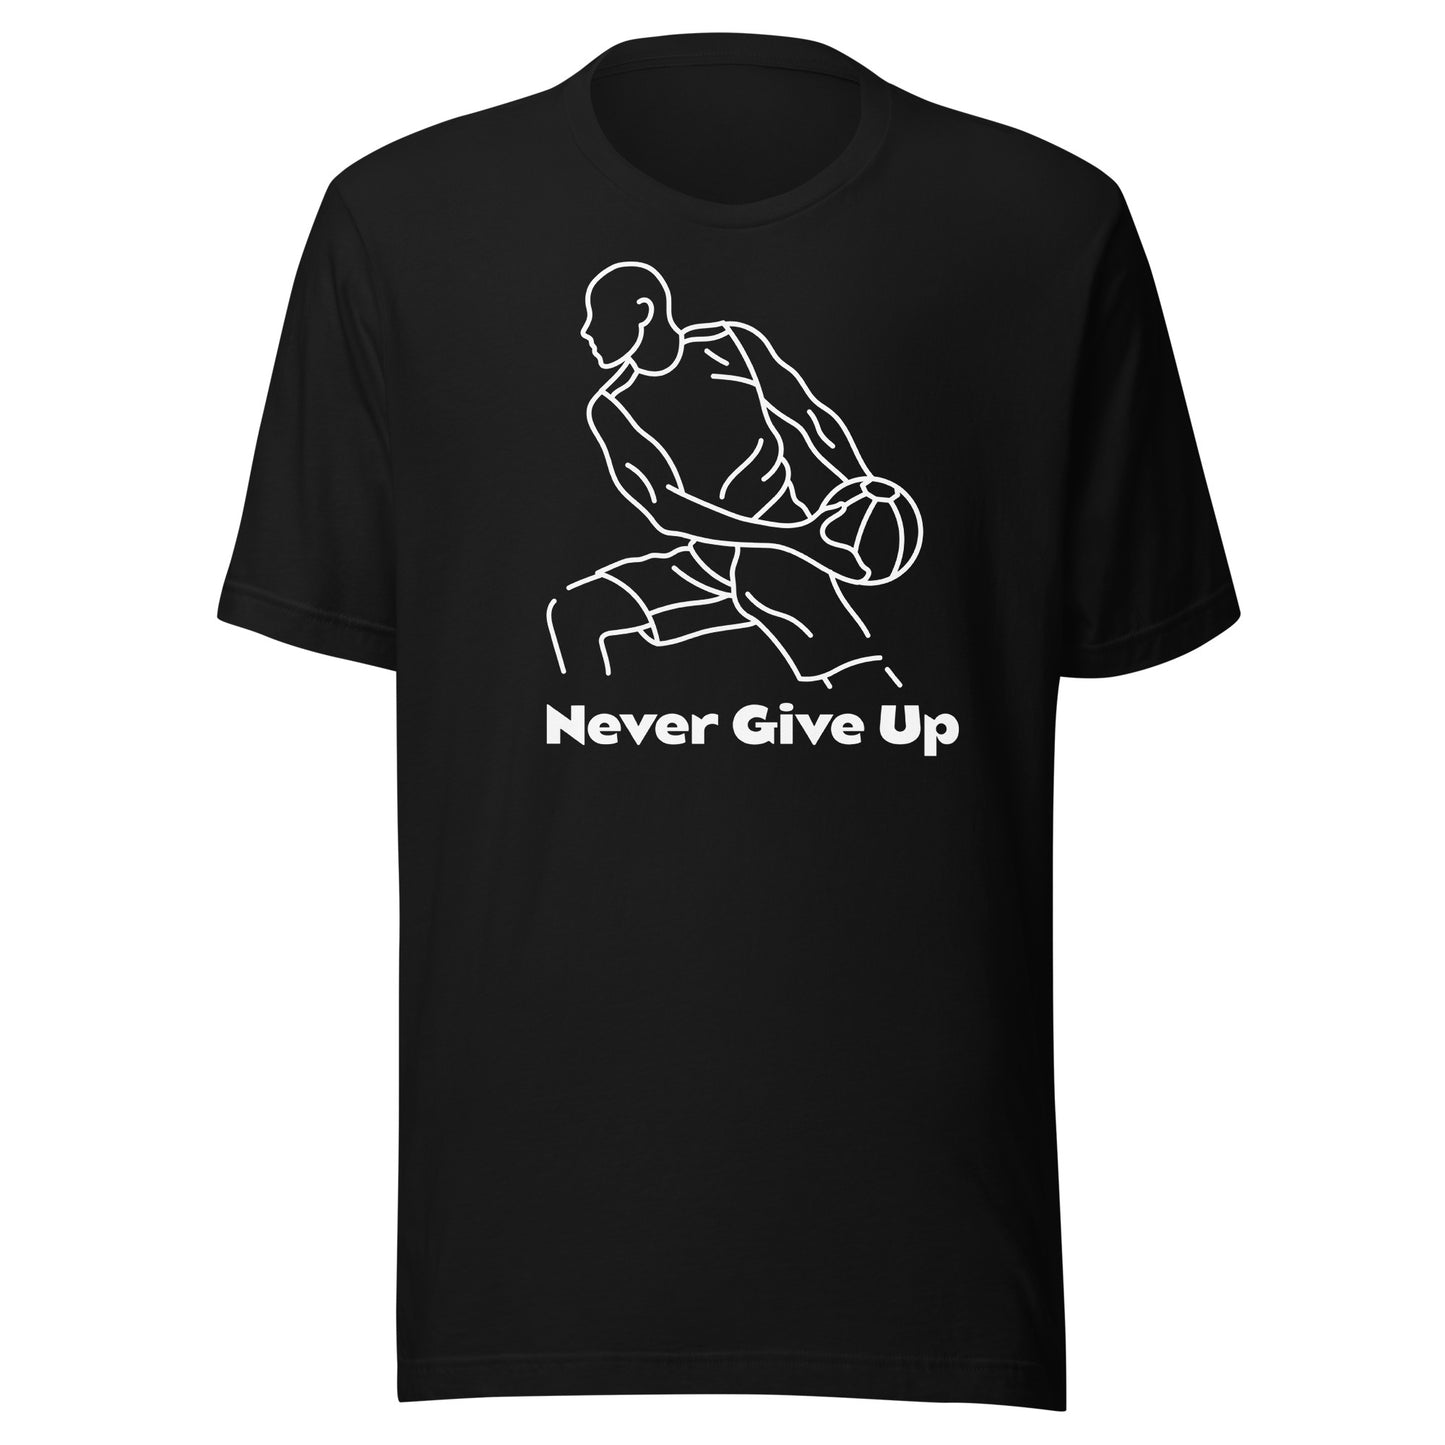 Score Big with our 'Never Give Up Basketball' T-Shirts